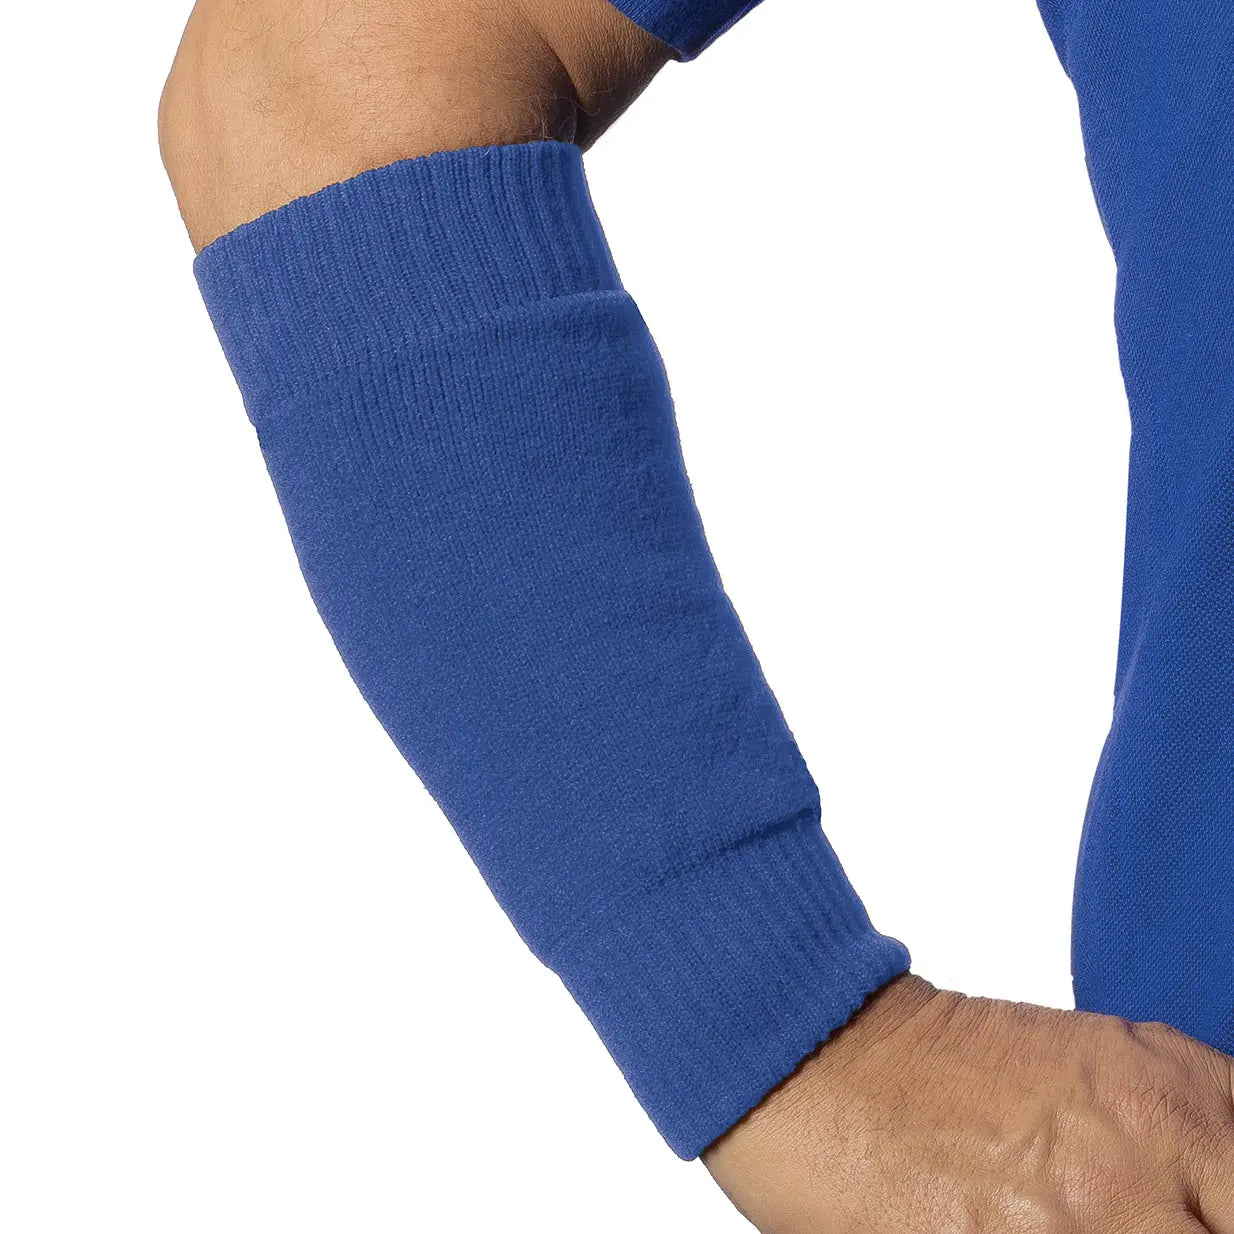 Forearm Sleeves -Regular/Heavy Weight. Arm protectors for fragile skin (pair) Limbkeepers